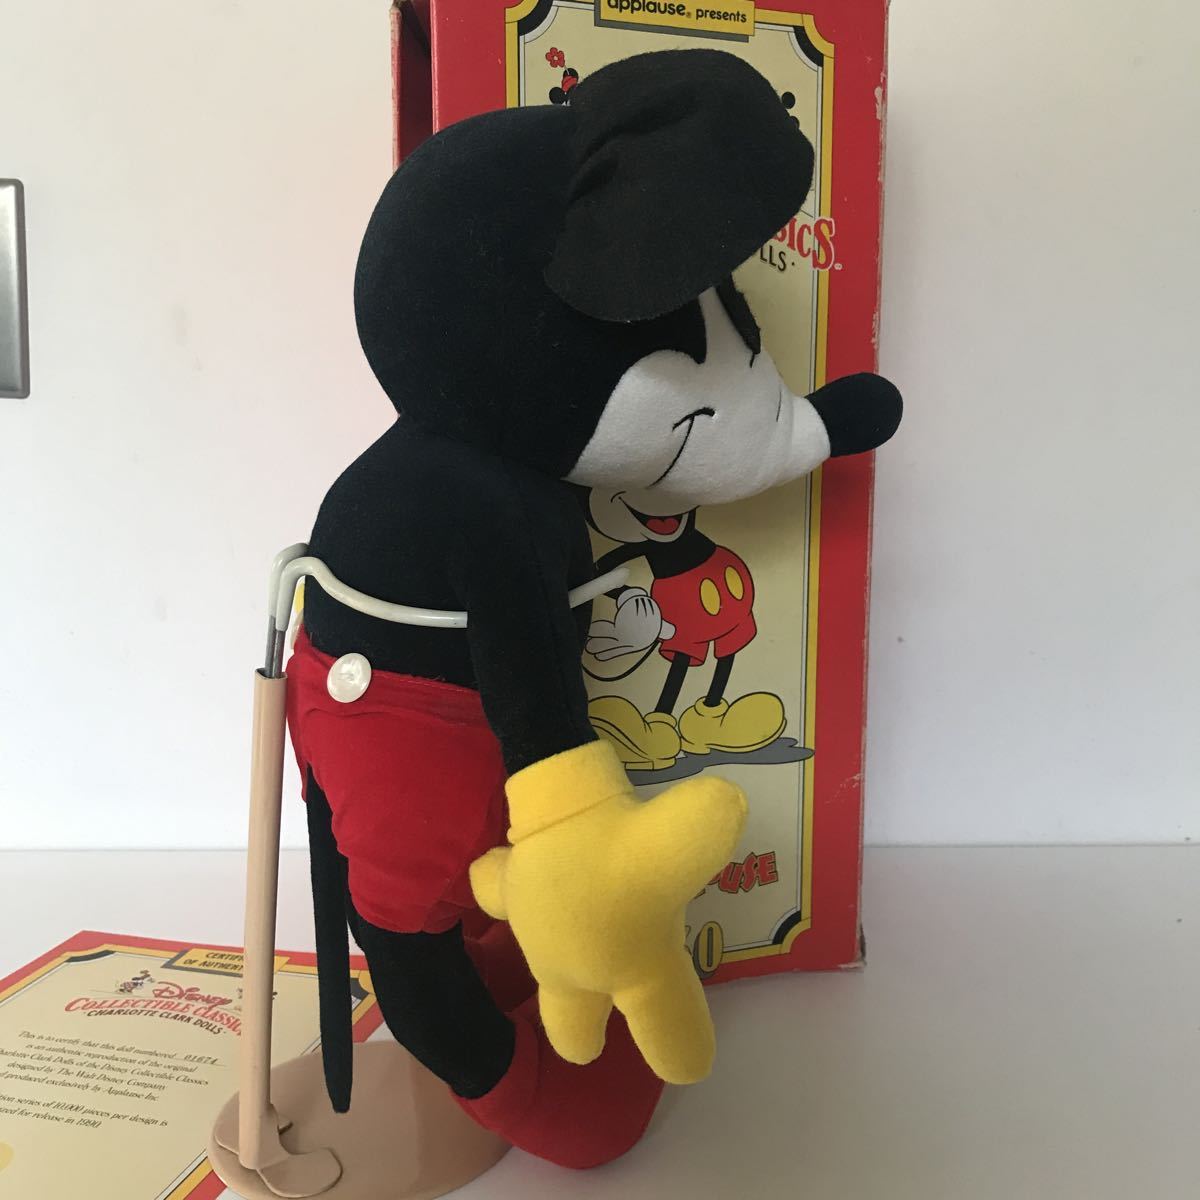  ultra rare America Los Angeles limitation one ten thousand body 1990 serial number 1674 soft toy Mickey Mouse Disney 90 period retro Mickey USA